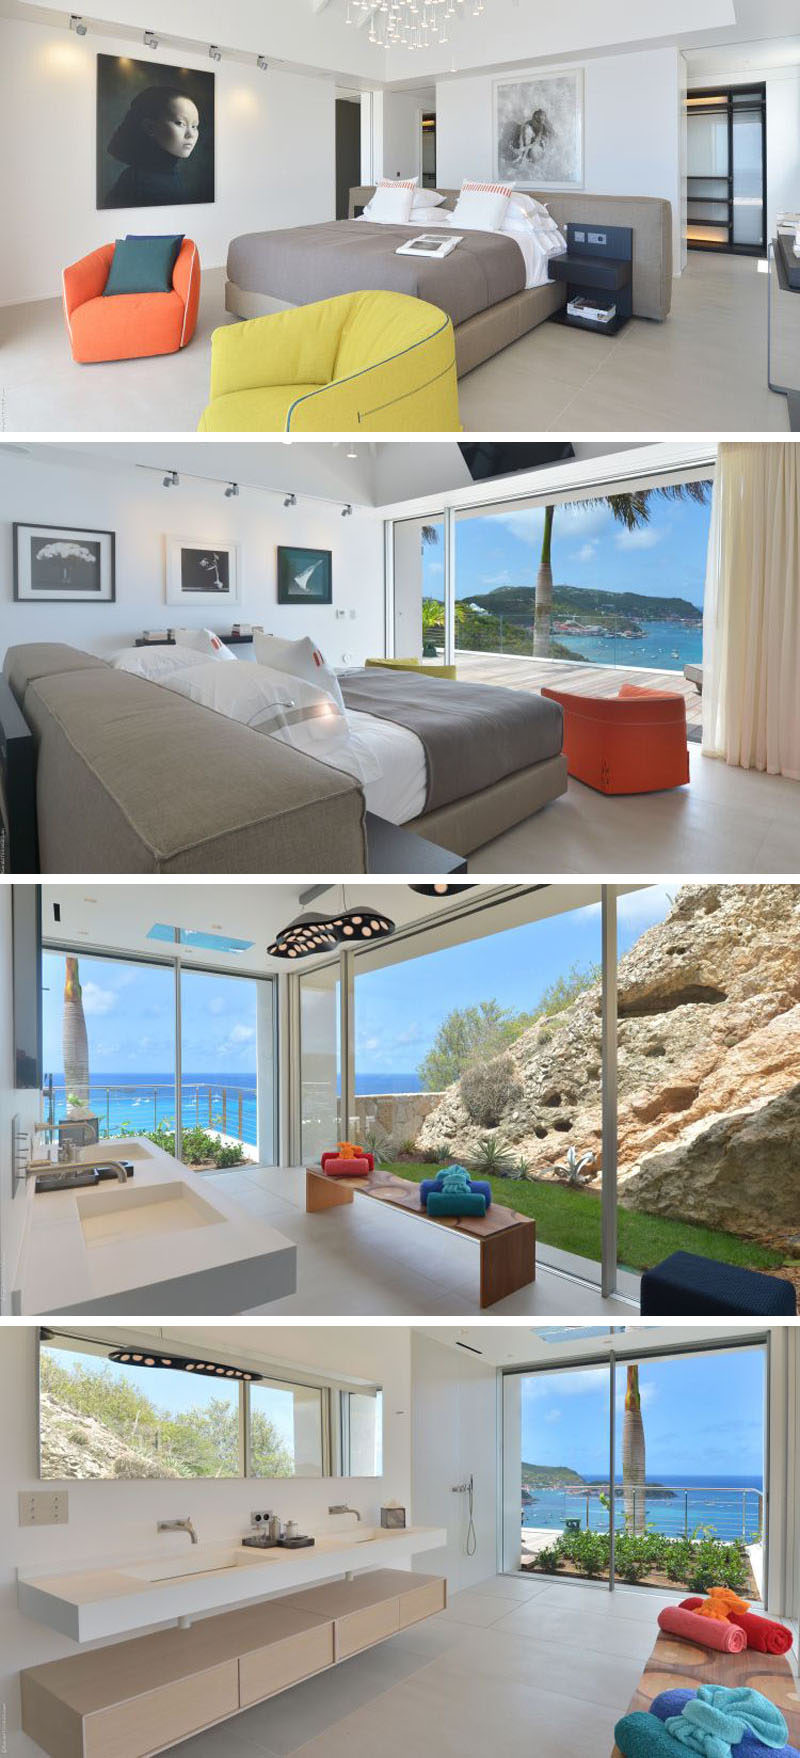 This bedroom has the bed positioned in the center of the room, idea for views out of the floor-to-ceiling windows. In the bathroom, the large windows let in an abundance of natural light and provide views of the water.